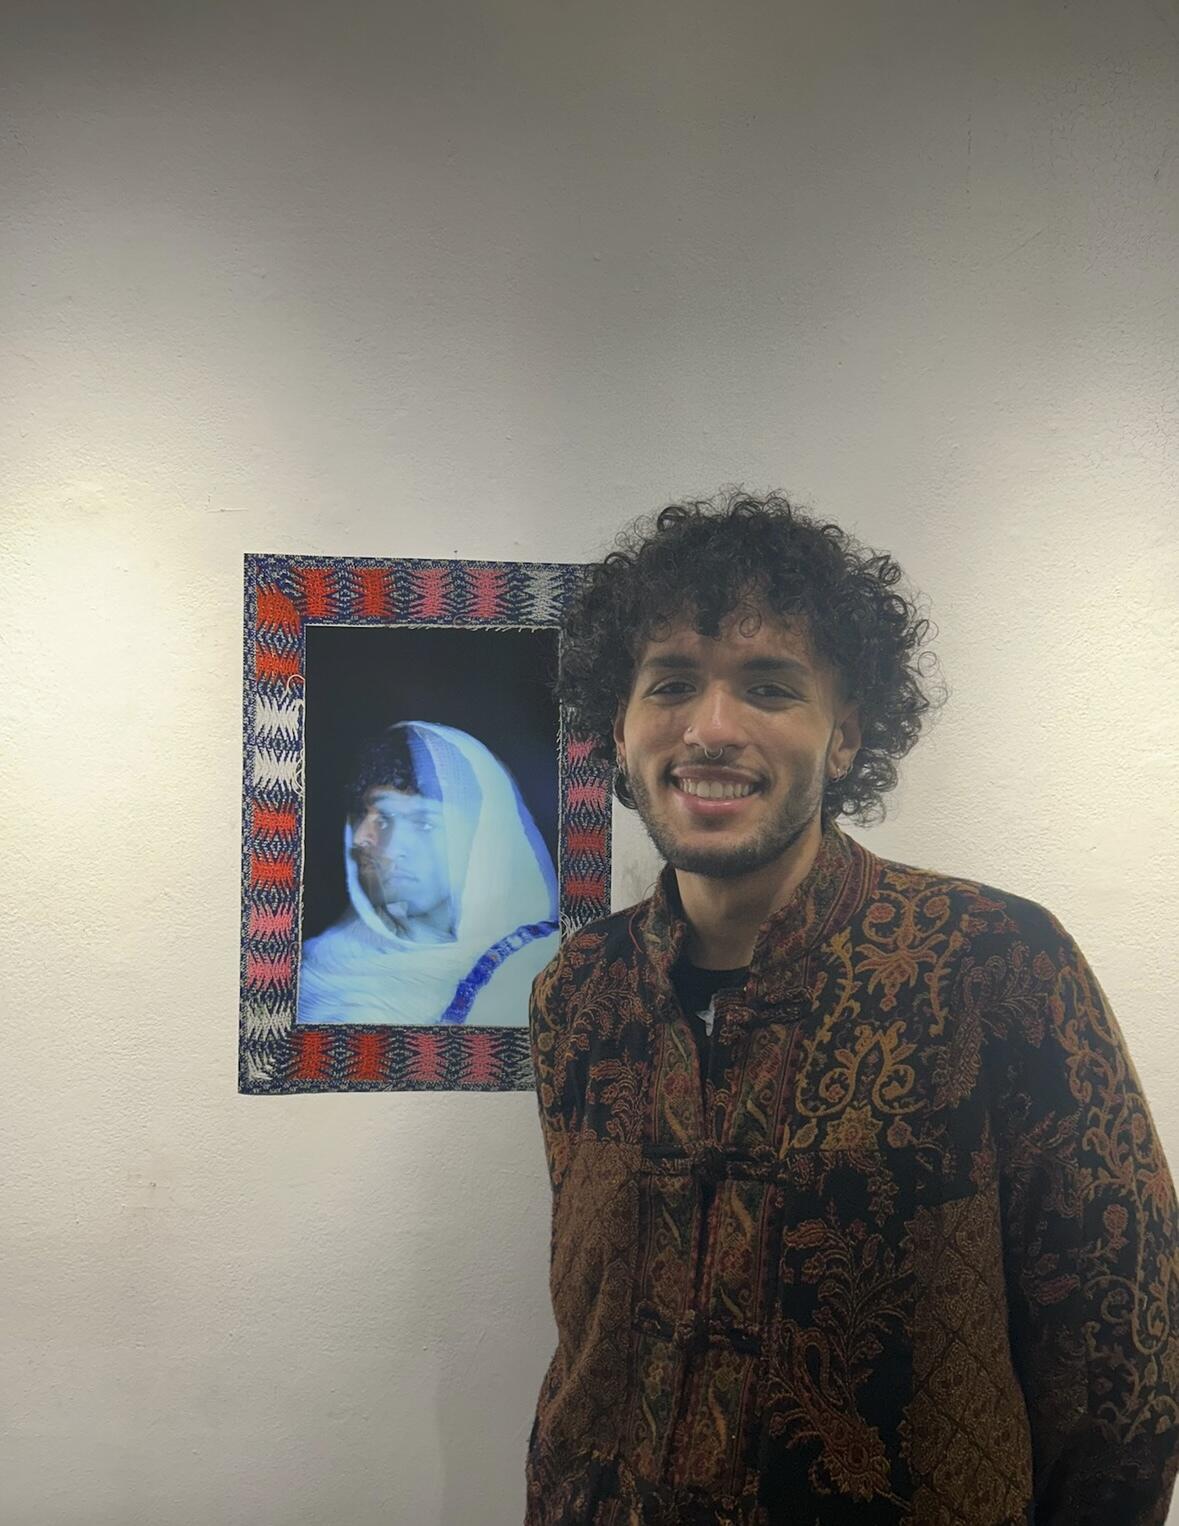 A photo of a man from the waist up. He is standing next to a photograph hanging on a wall